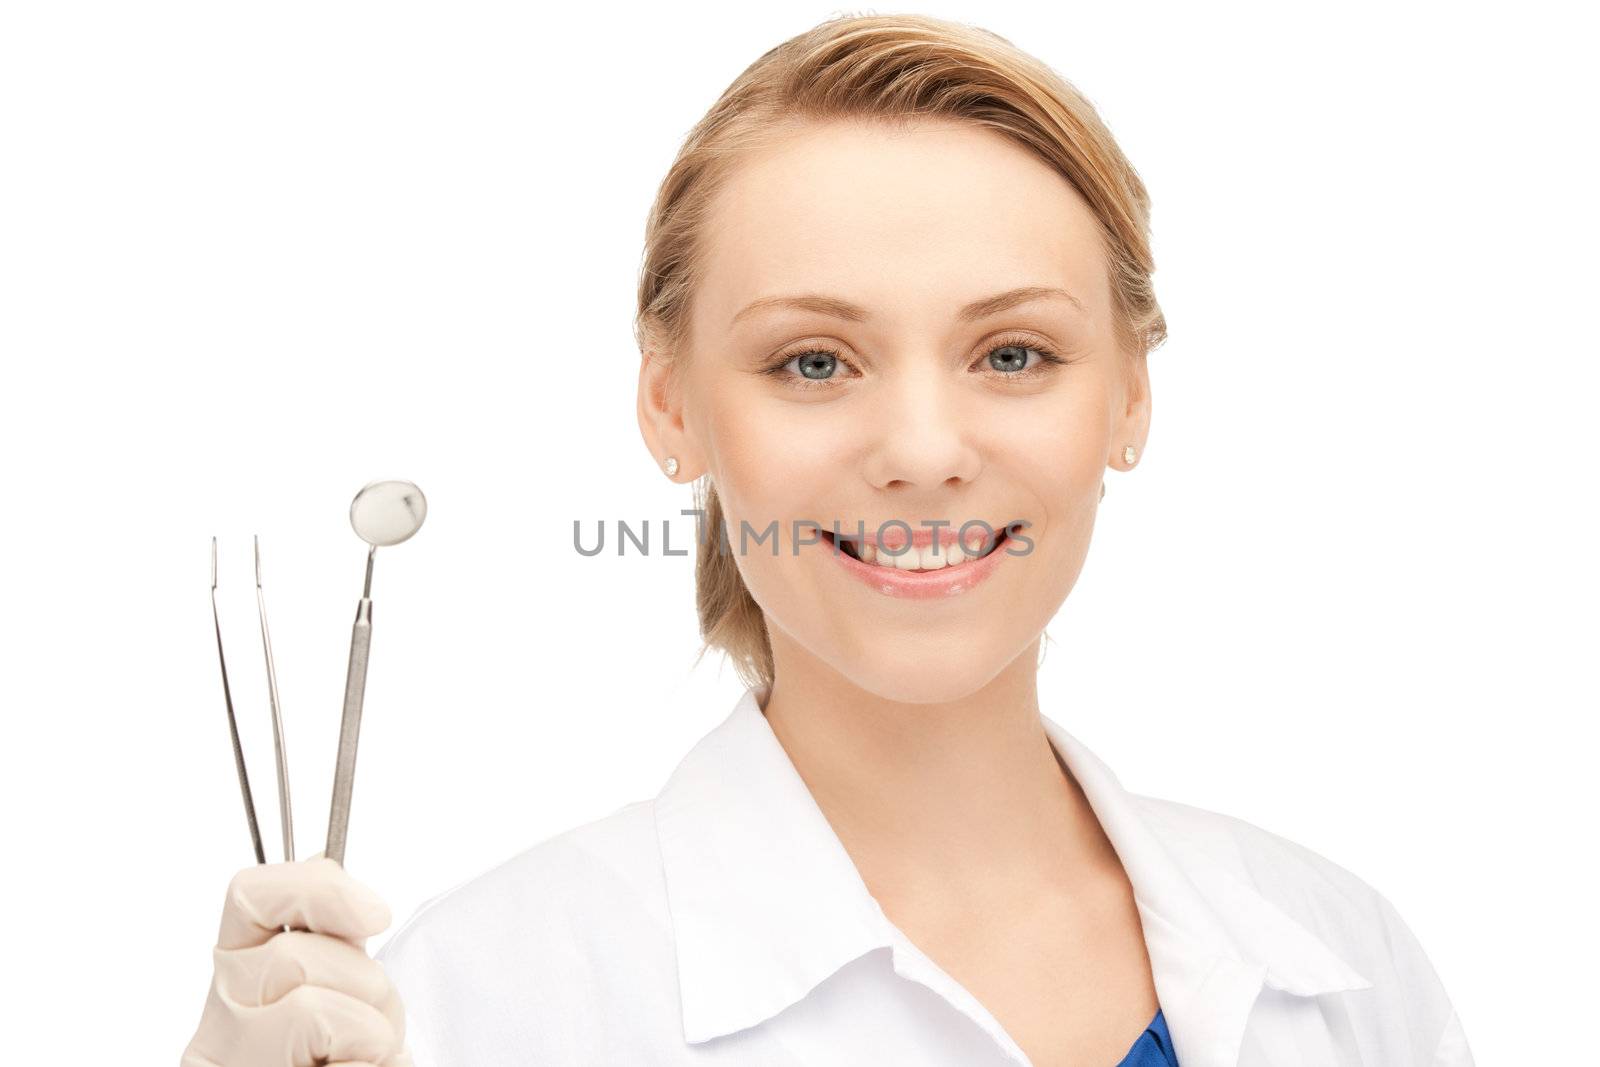 picture of attractive female dentist with tools